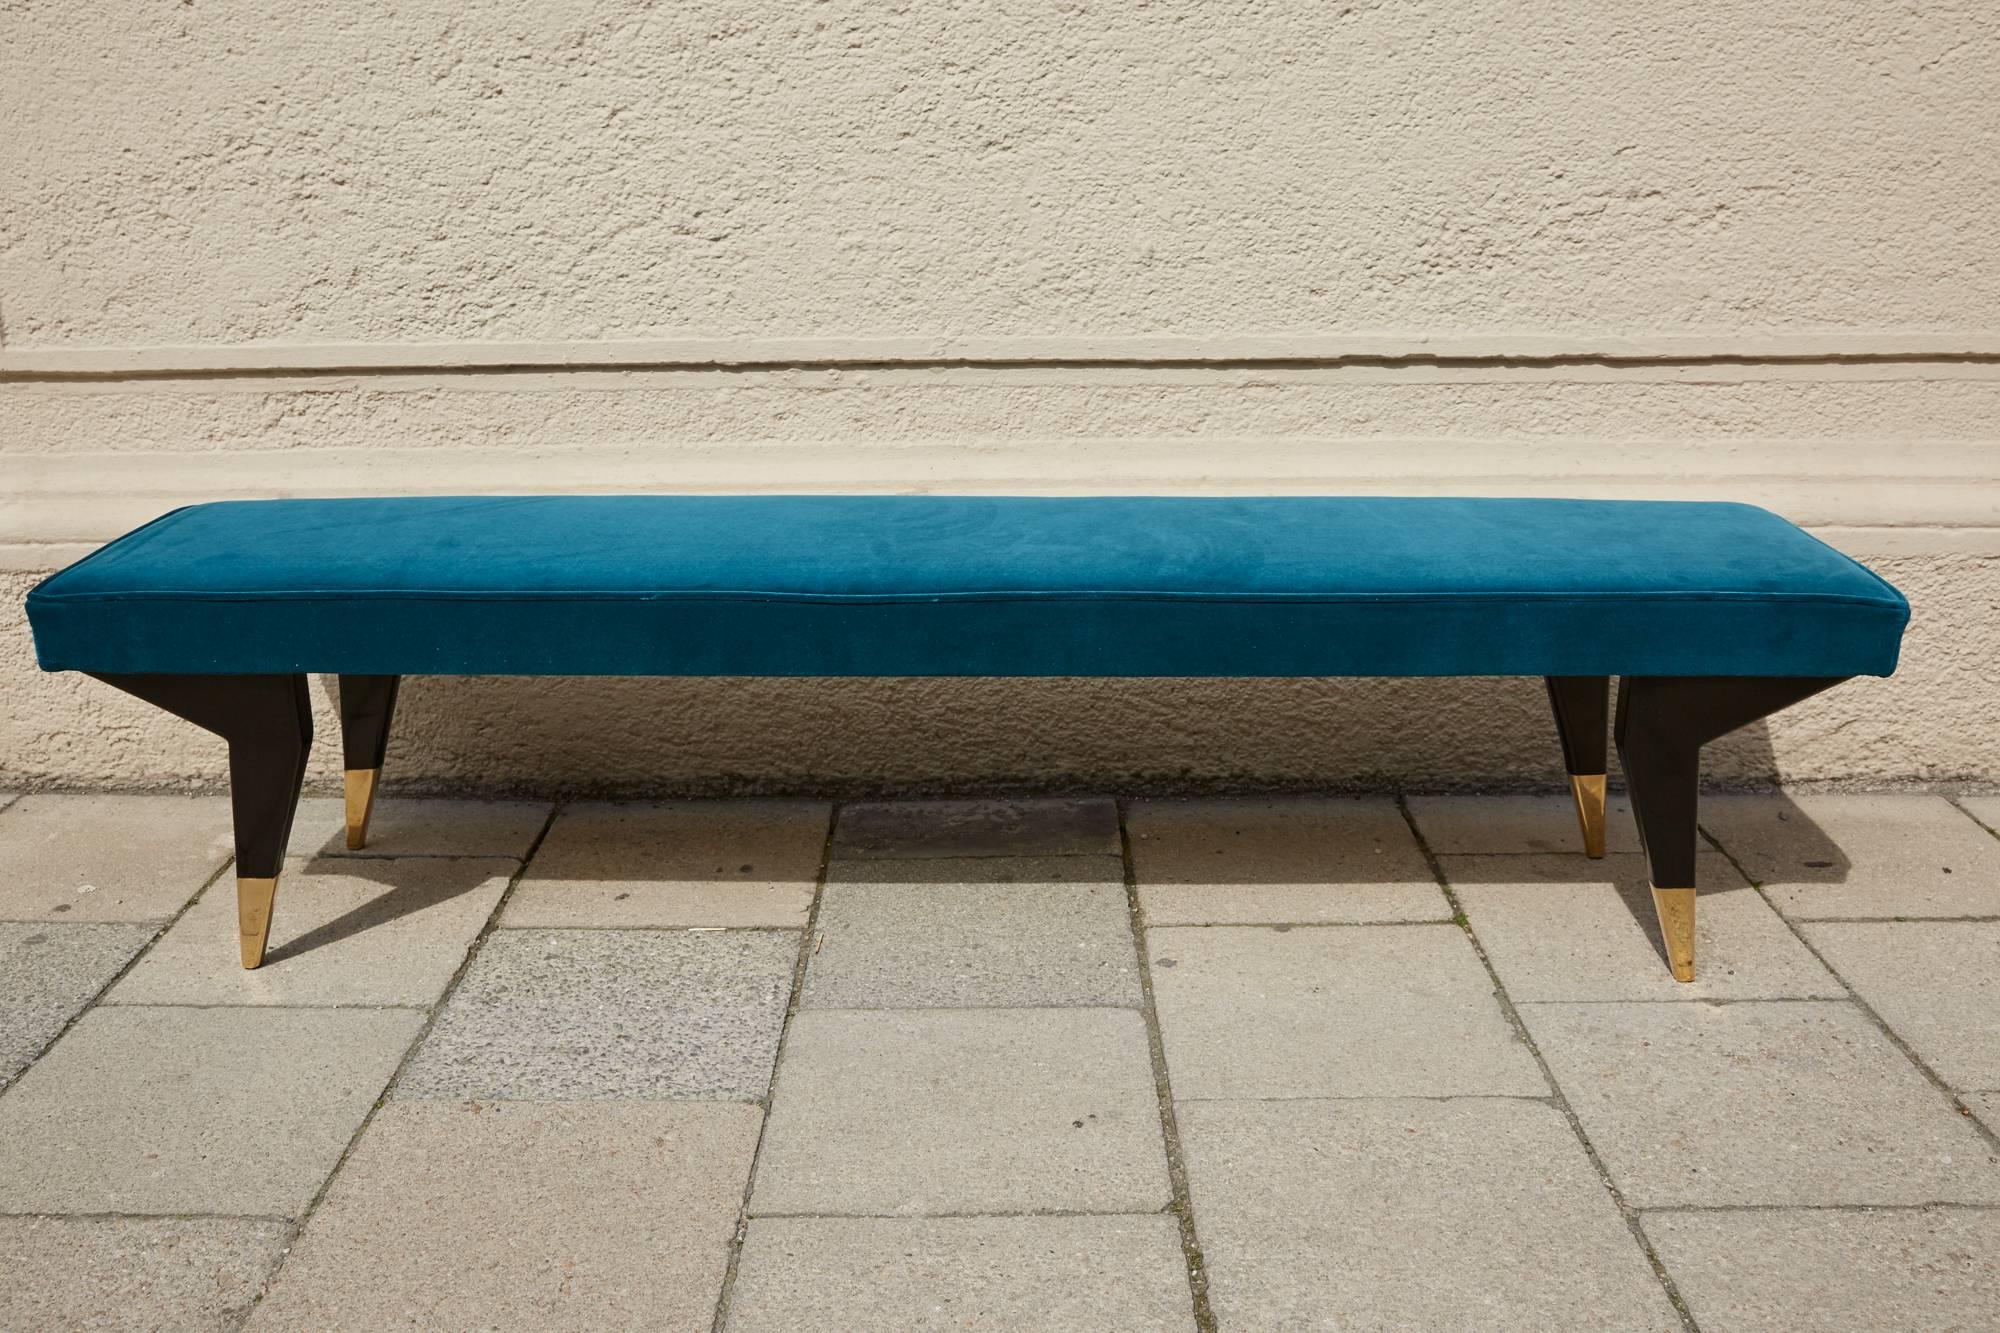 Pair of elegant padded benches, Italy, circa 1950, attributed to Ico Parisi, black shellack polished legs, massive brass legs, reupholstered with designers Guild turquoise blue velvet fabric, piping around the pad. Complete restored and ready for